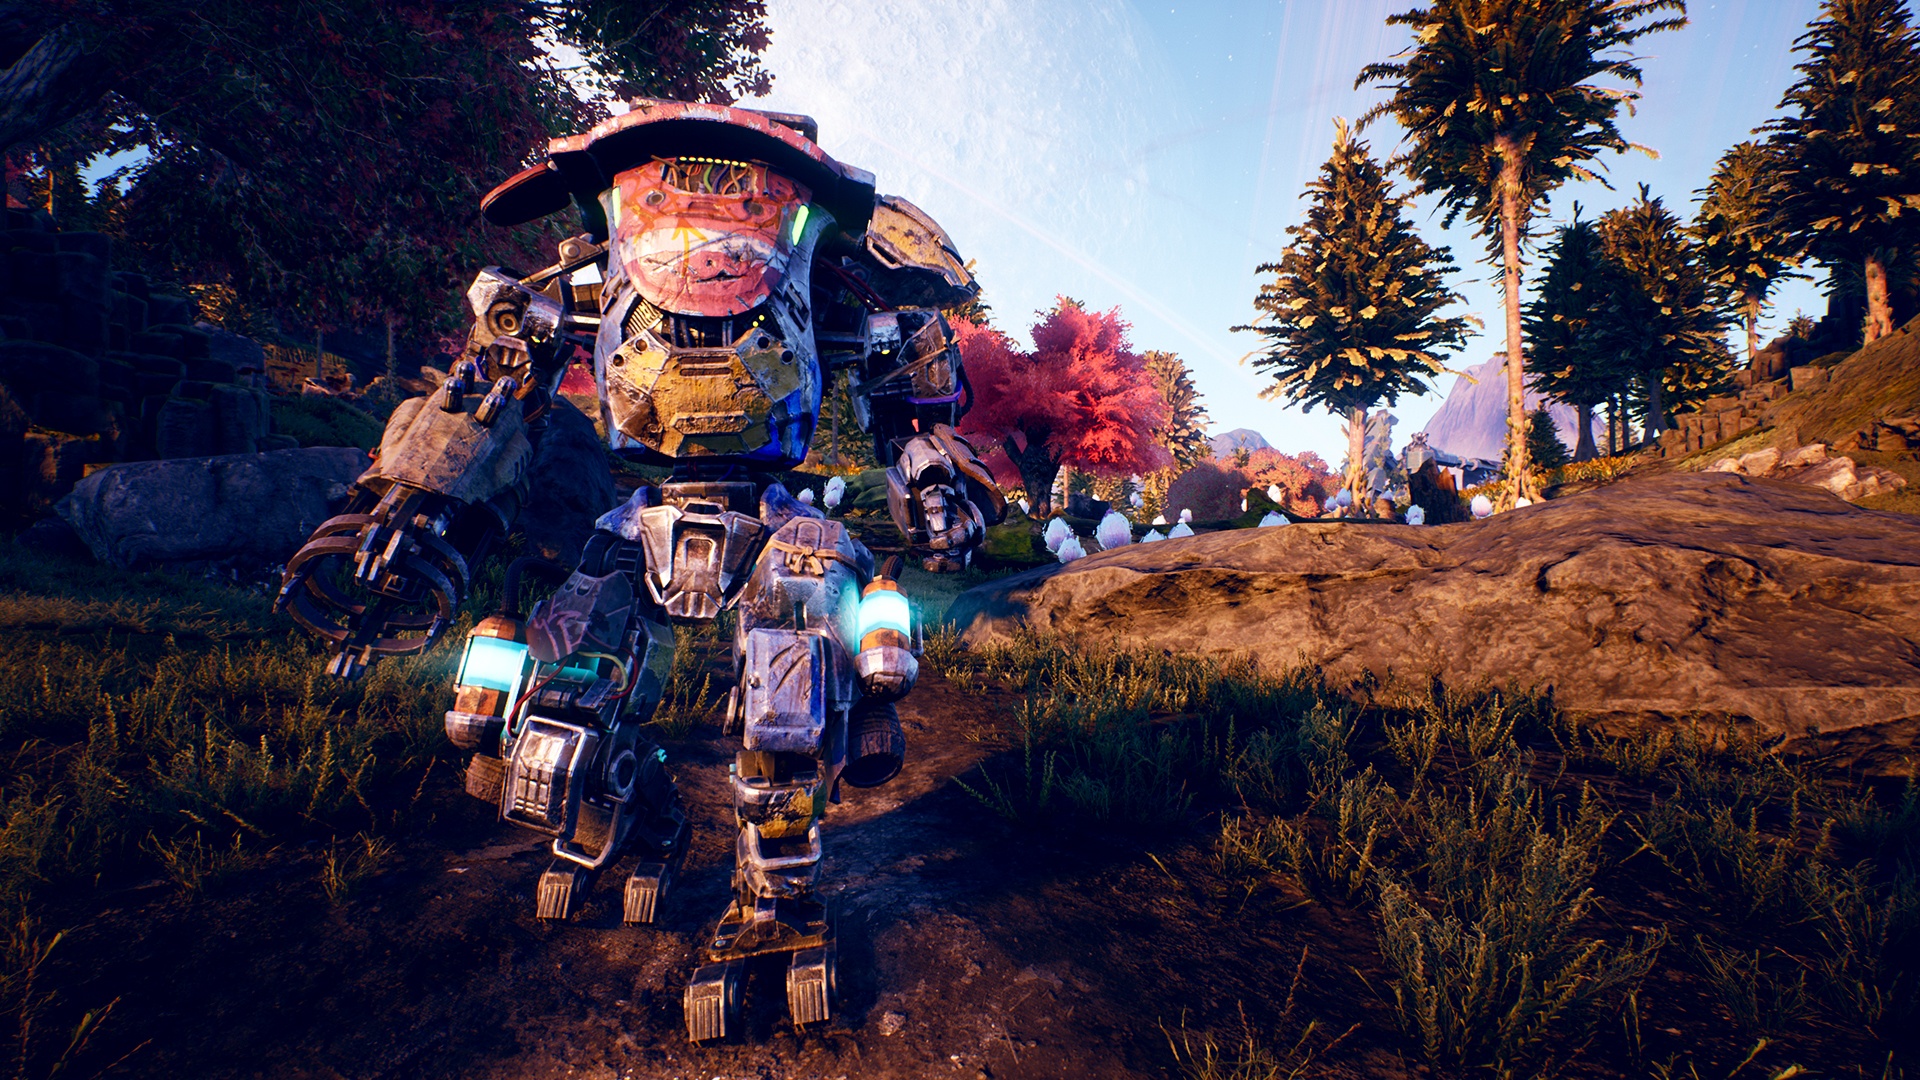 Скриншот *The Outer Worlds [PS4] 5.05 / 6.72 / 7.02 / 7.55 [EUR] (2019) [Русский] (v1.04)*